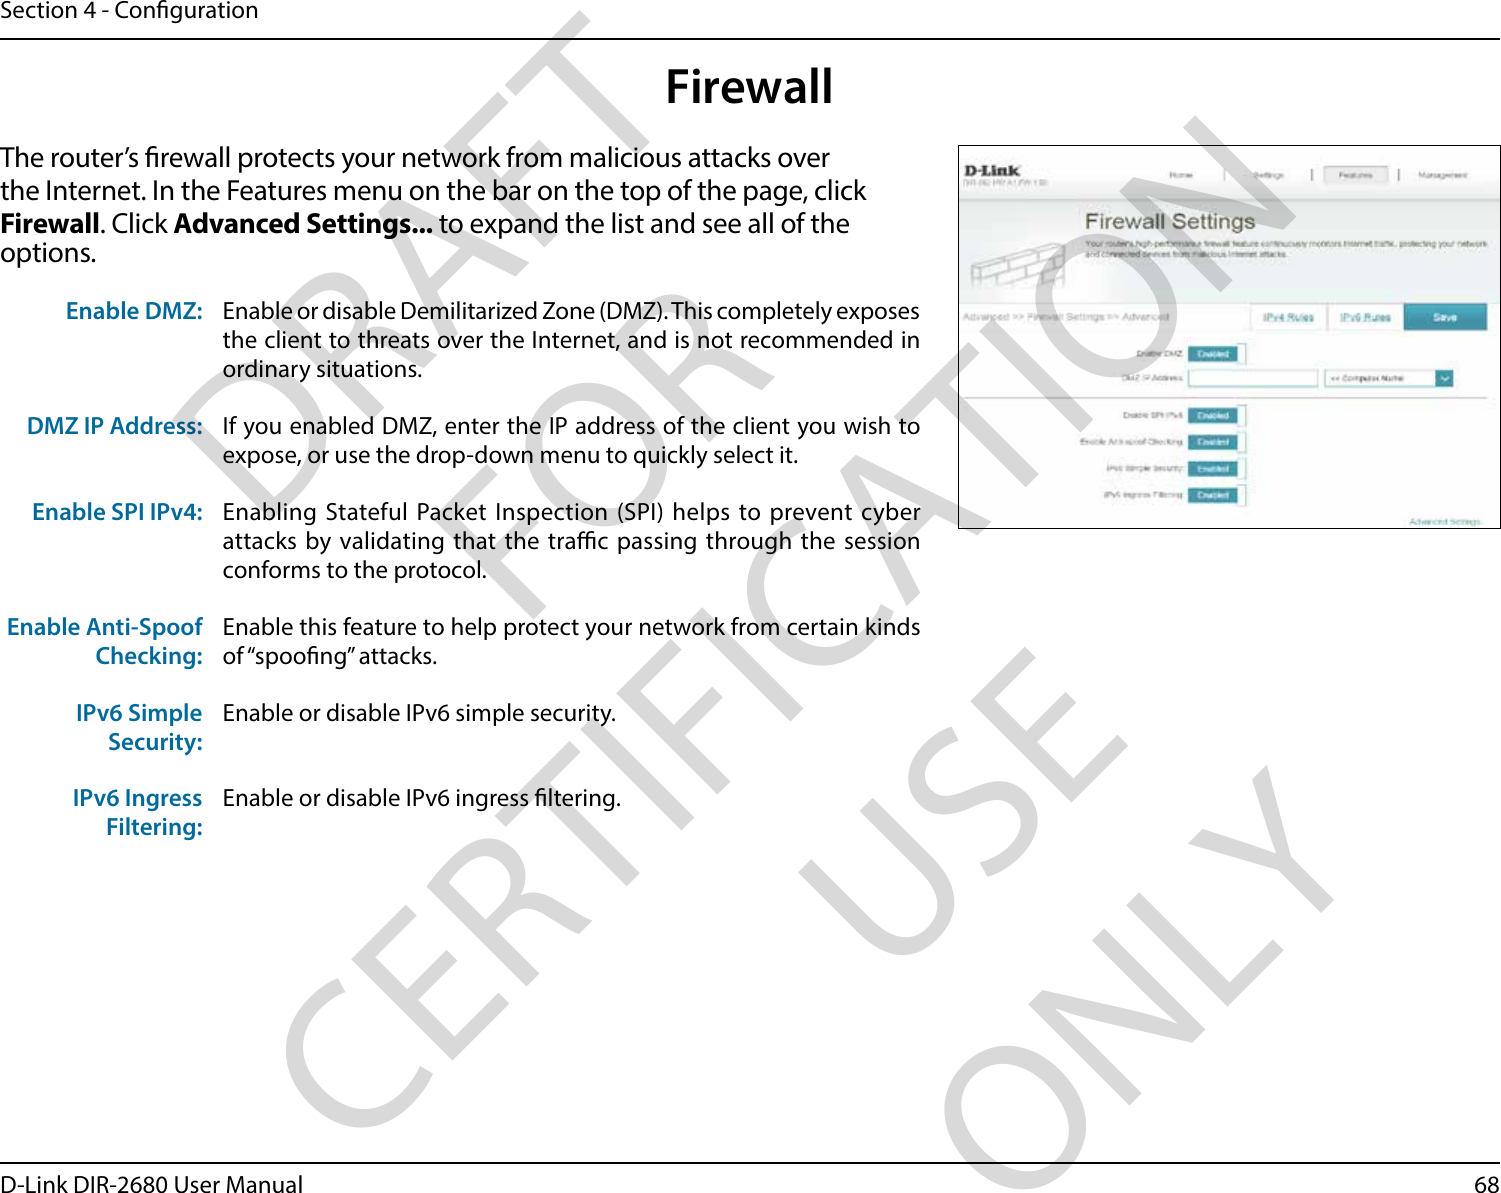 68D-Link DIR-2680 User ManualSection 4 - CongurationFirewallThe router’s rewall protects your network from malicious attacks over the Internet. In the Features menu on the bar on the top of the page, click Firewall. Click Advanced Settings... to expand the list and see all of the options. Enable DMZ: Enable or disable Demilitarized Zone (DMZ). This completely exposes the client to threats over the Internet, and is not recommended in ordinary situations.DMZ IP Address: If you enabled DMZ, enter the IP address of the client you wish to expose, or use the drop-down menu to quickly select it.Enable SPI IPv4: Enabling Stateful Packet Inspection (SPI) helps to prevent cyber attacks by validating that the trac passing through the session conforms to the protocol.Enable Anti-Spoof Checking:Enable this feature to help protect your network from certain kinds of “spoong” attacks.IPv6 Simple Security:Enable or disable IPv6 simple security.IPv6 Ingress Filtering:Enable or disable IPv6 ingress ltering.DRAFT FOR CERTIFICATION USE ONLY